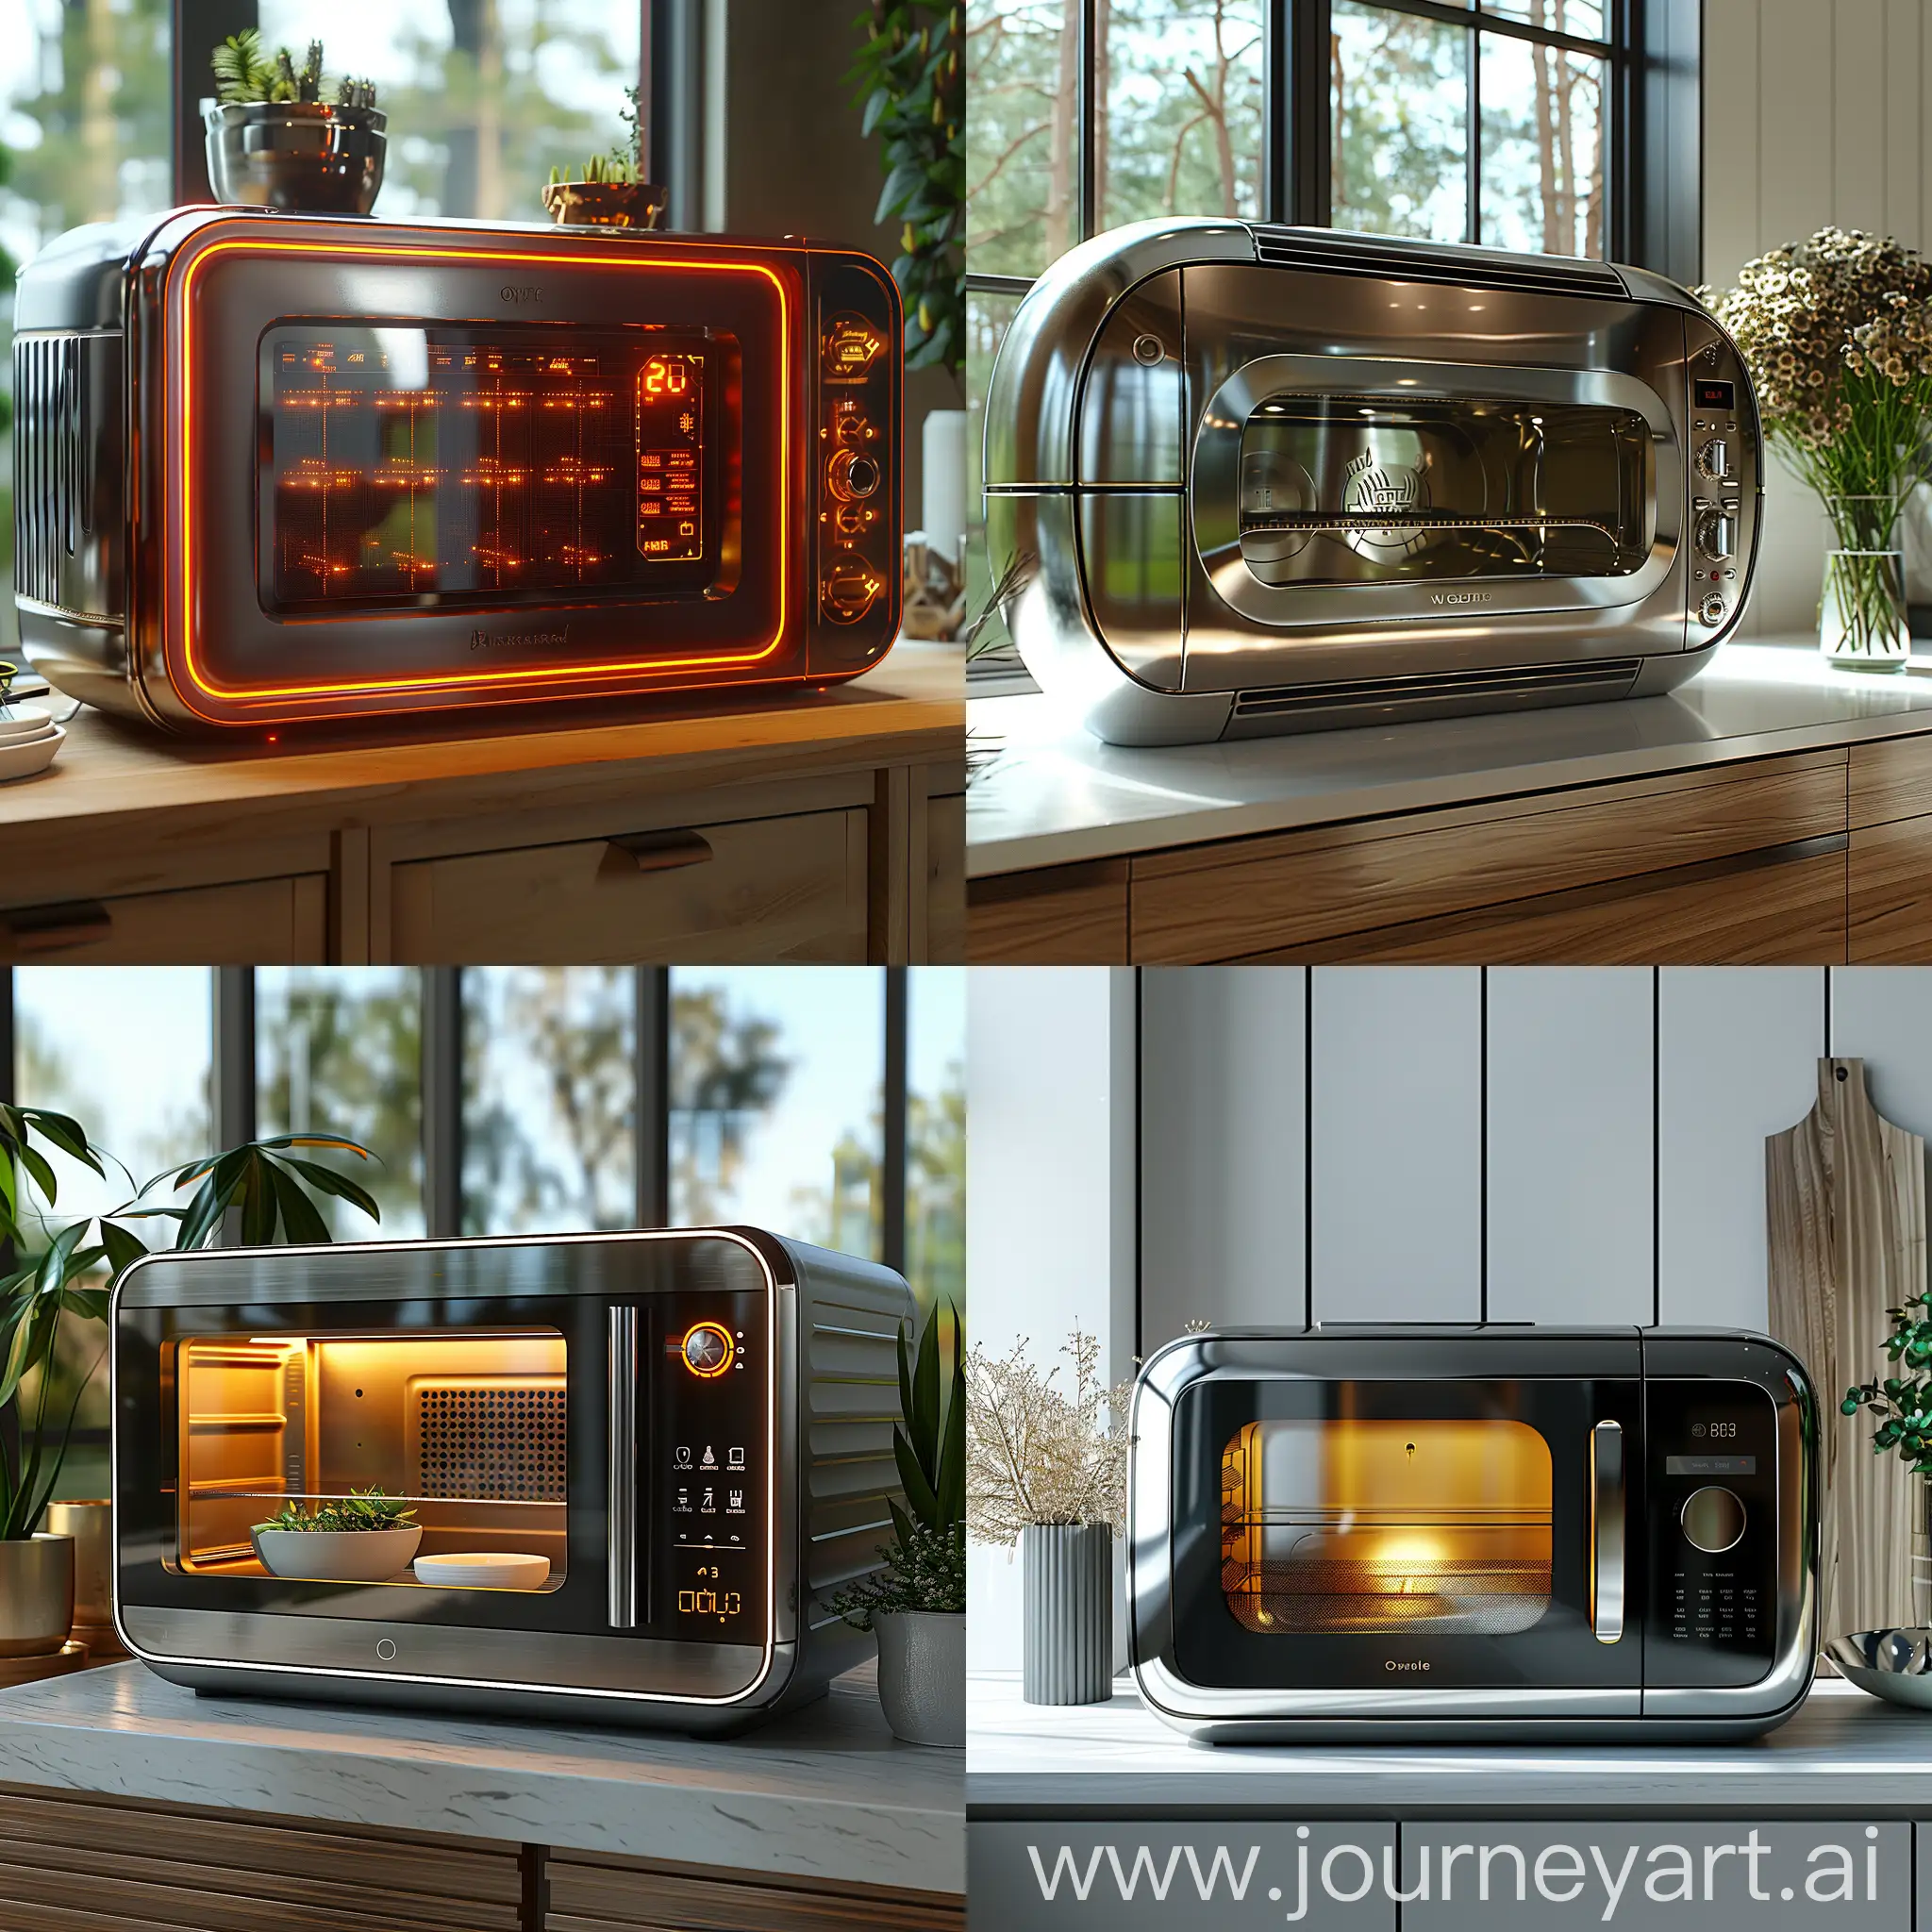 Futuristic-Stainless-Steel-Microwave-with-Smart-Materials-High-Tech-Design